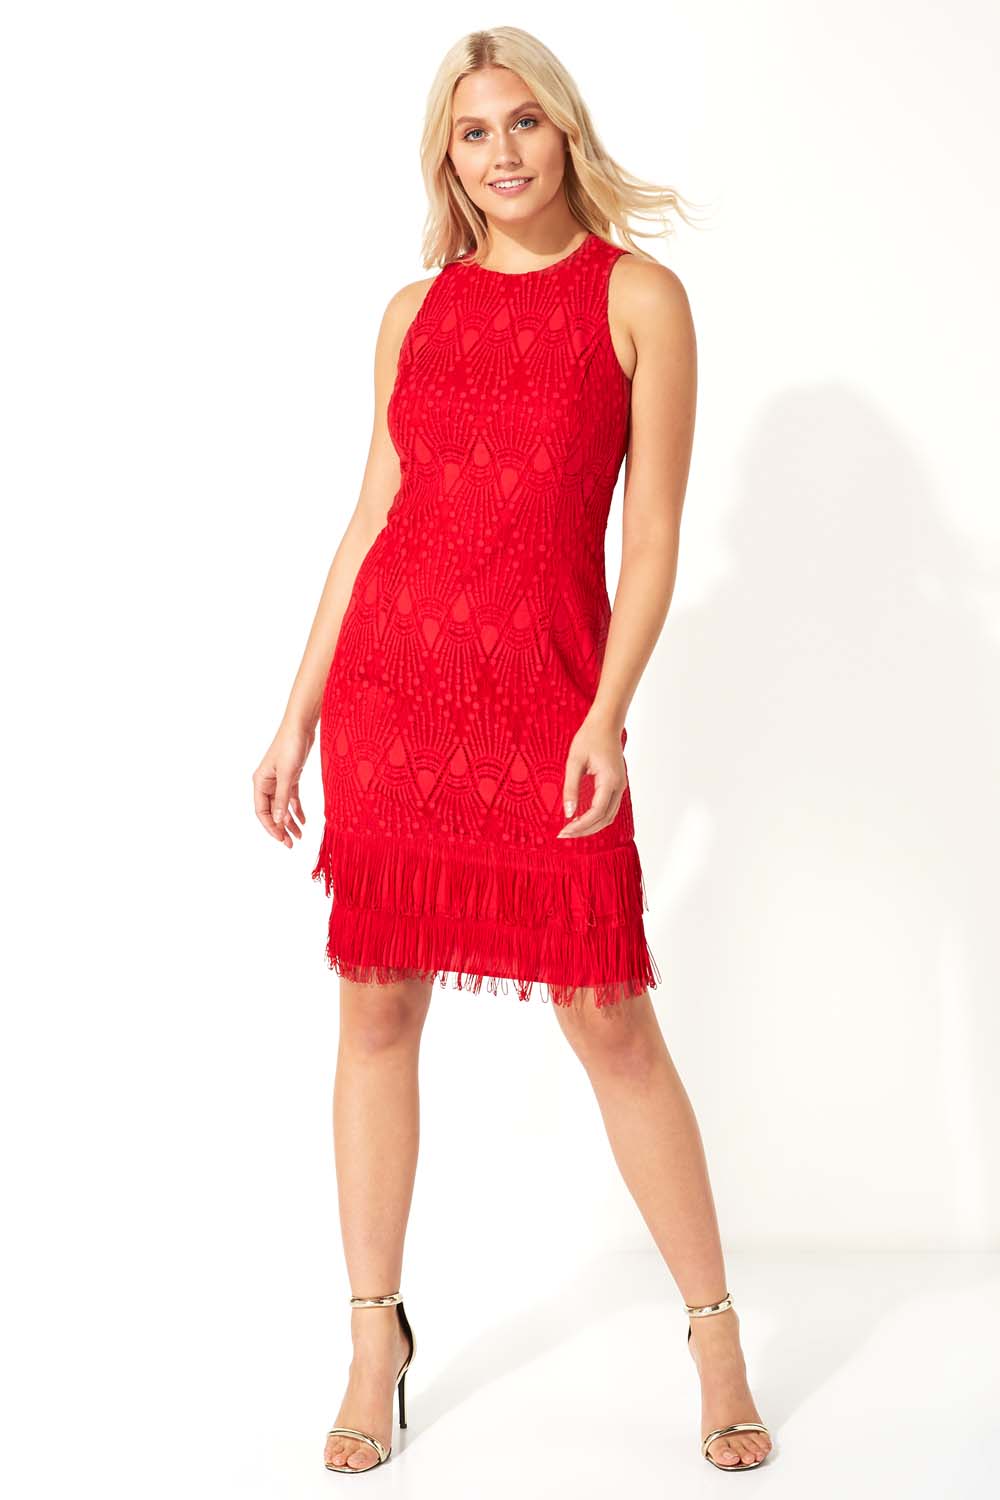 Red Lace Tassel Sleeveless Flapper Dress, Image 2 of 5